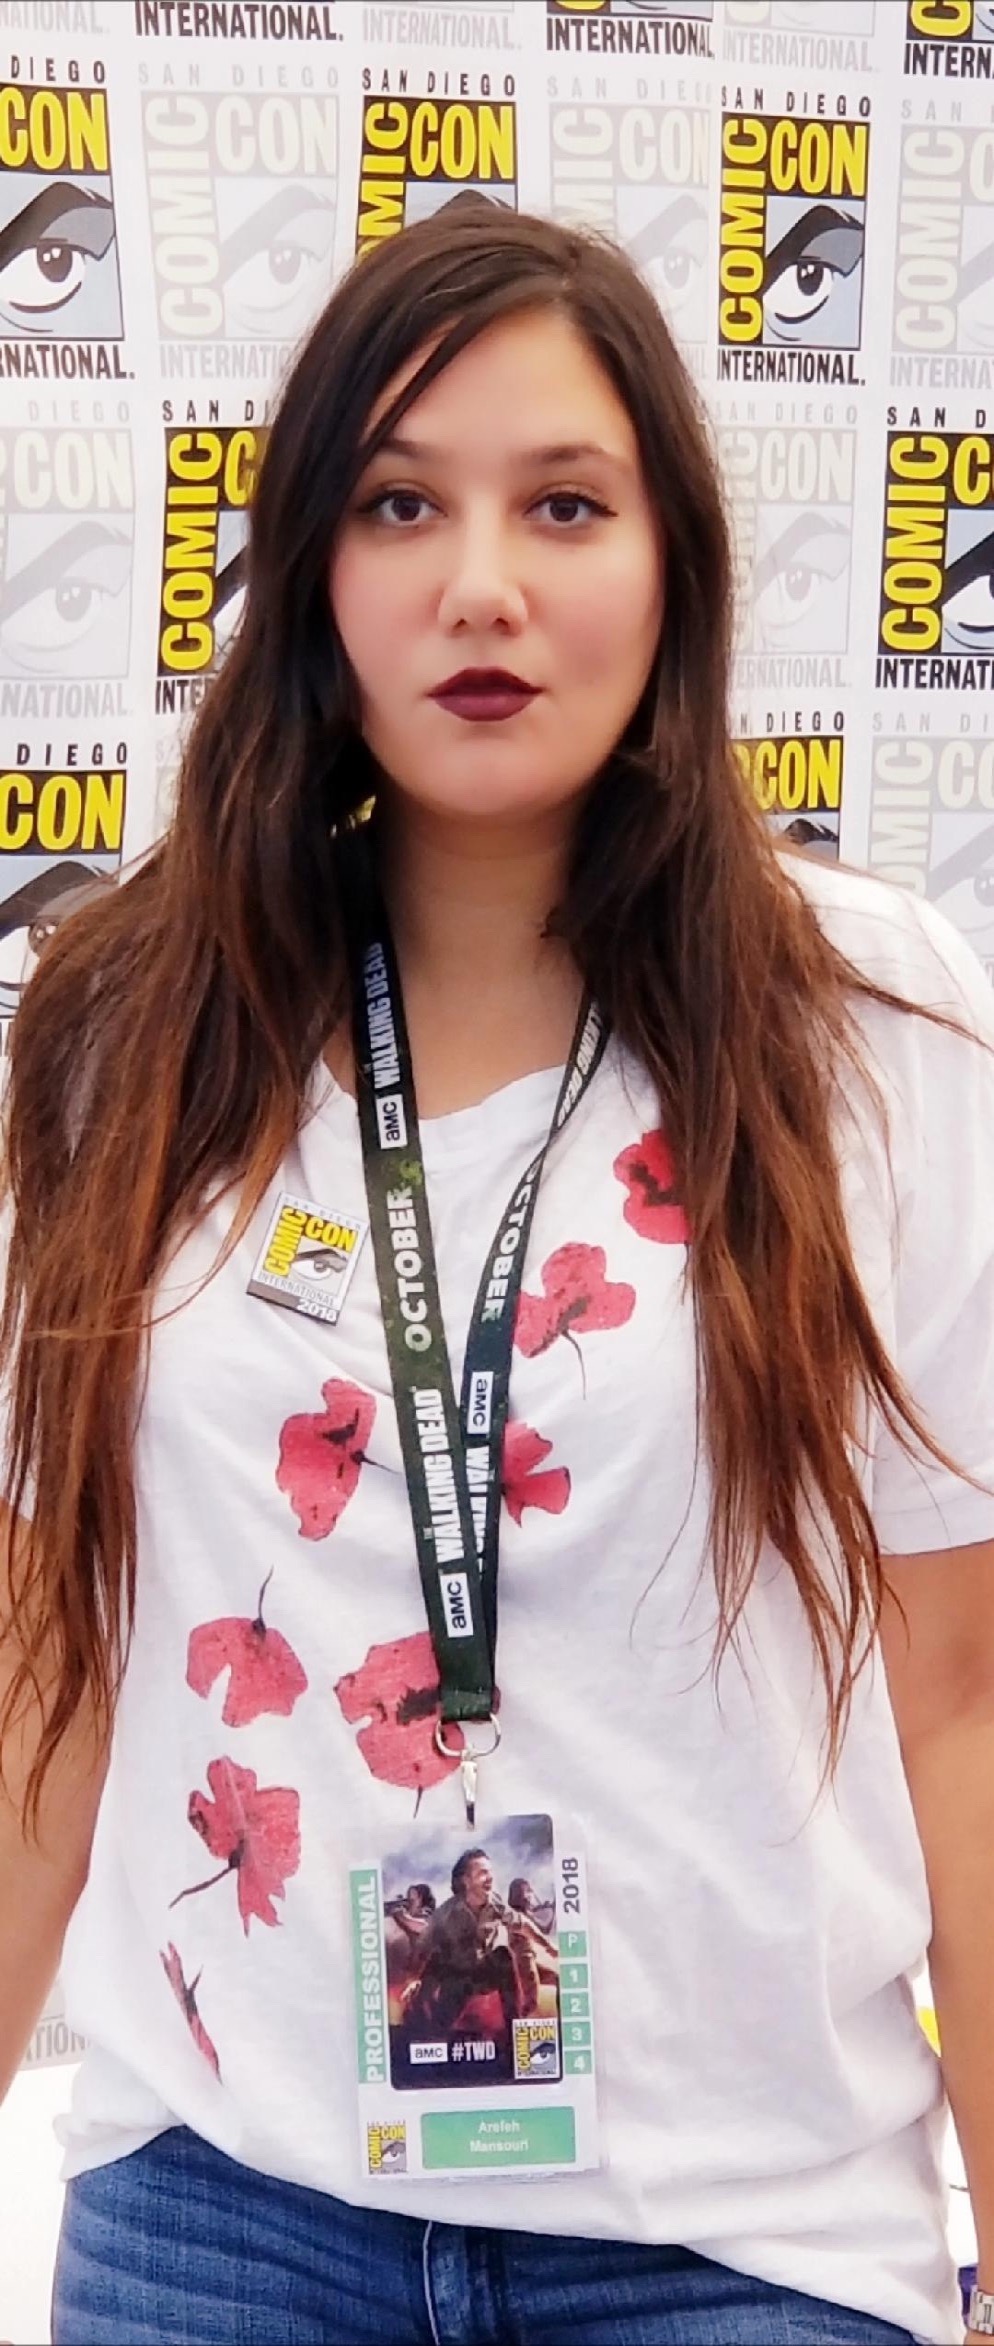 Costume designer Arefeh Mansouri at the Comic-Con International in San Diego